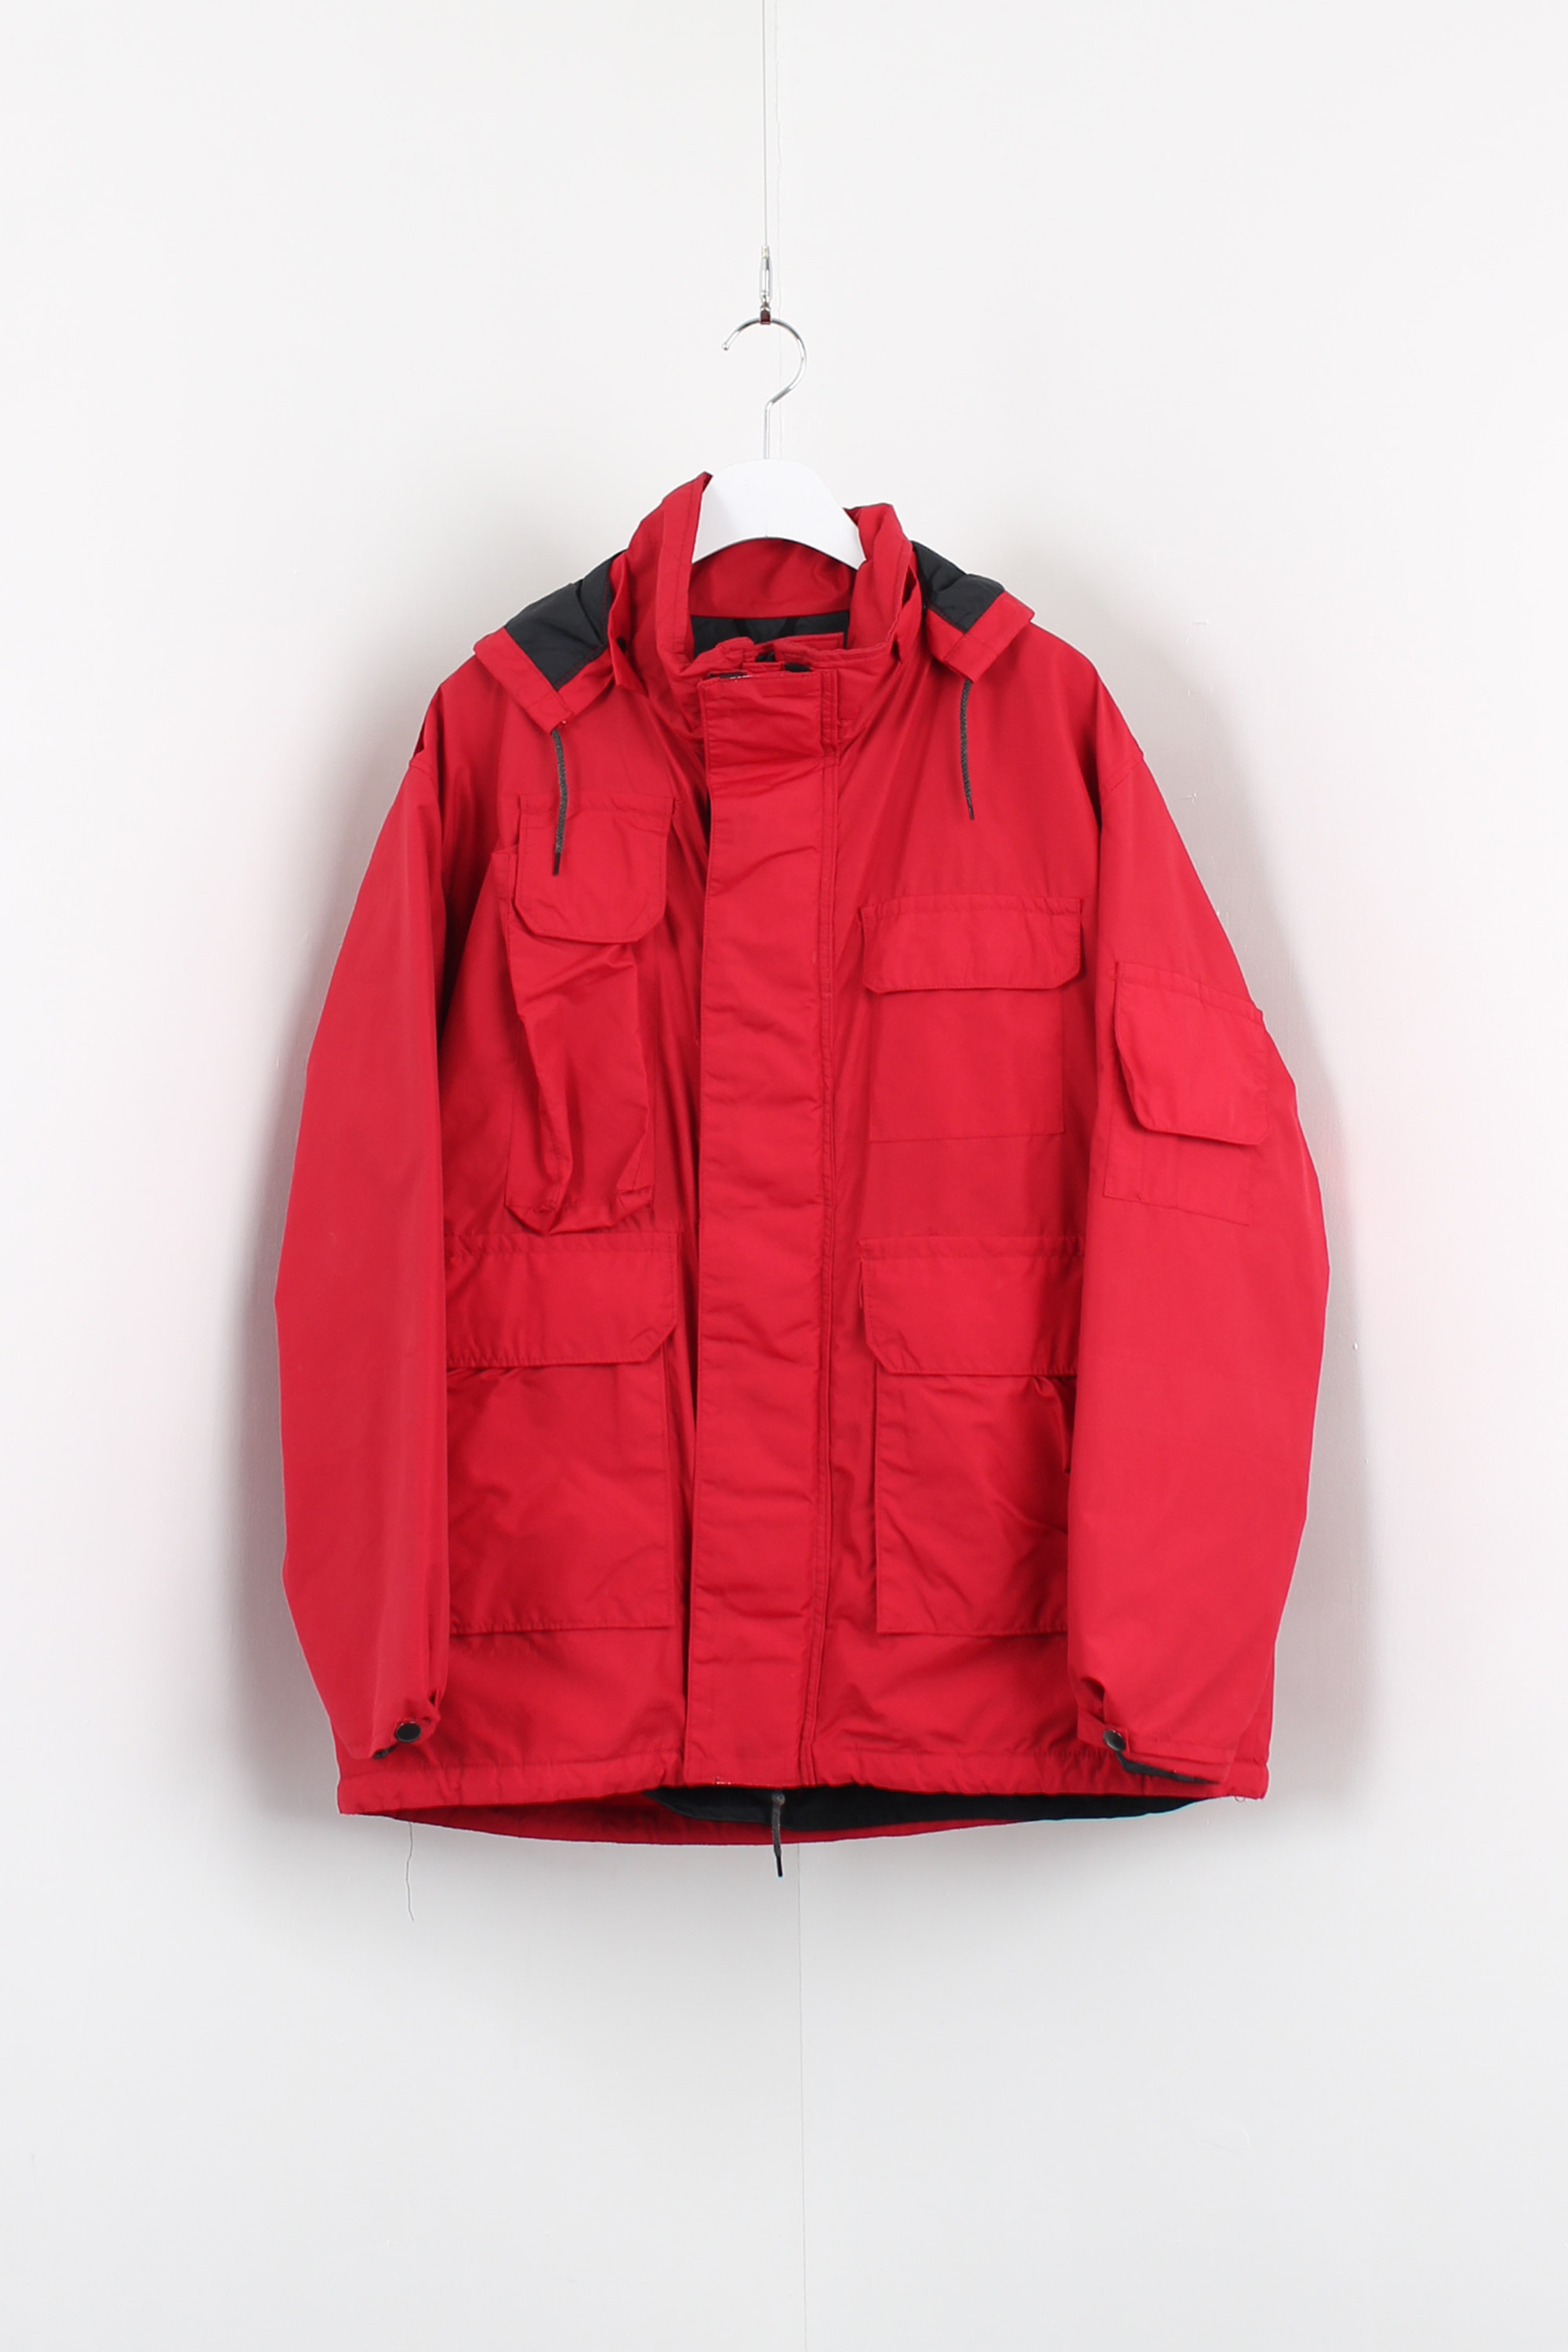 SPIEWAK for A.P.C. mountain jacket